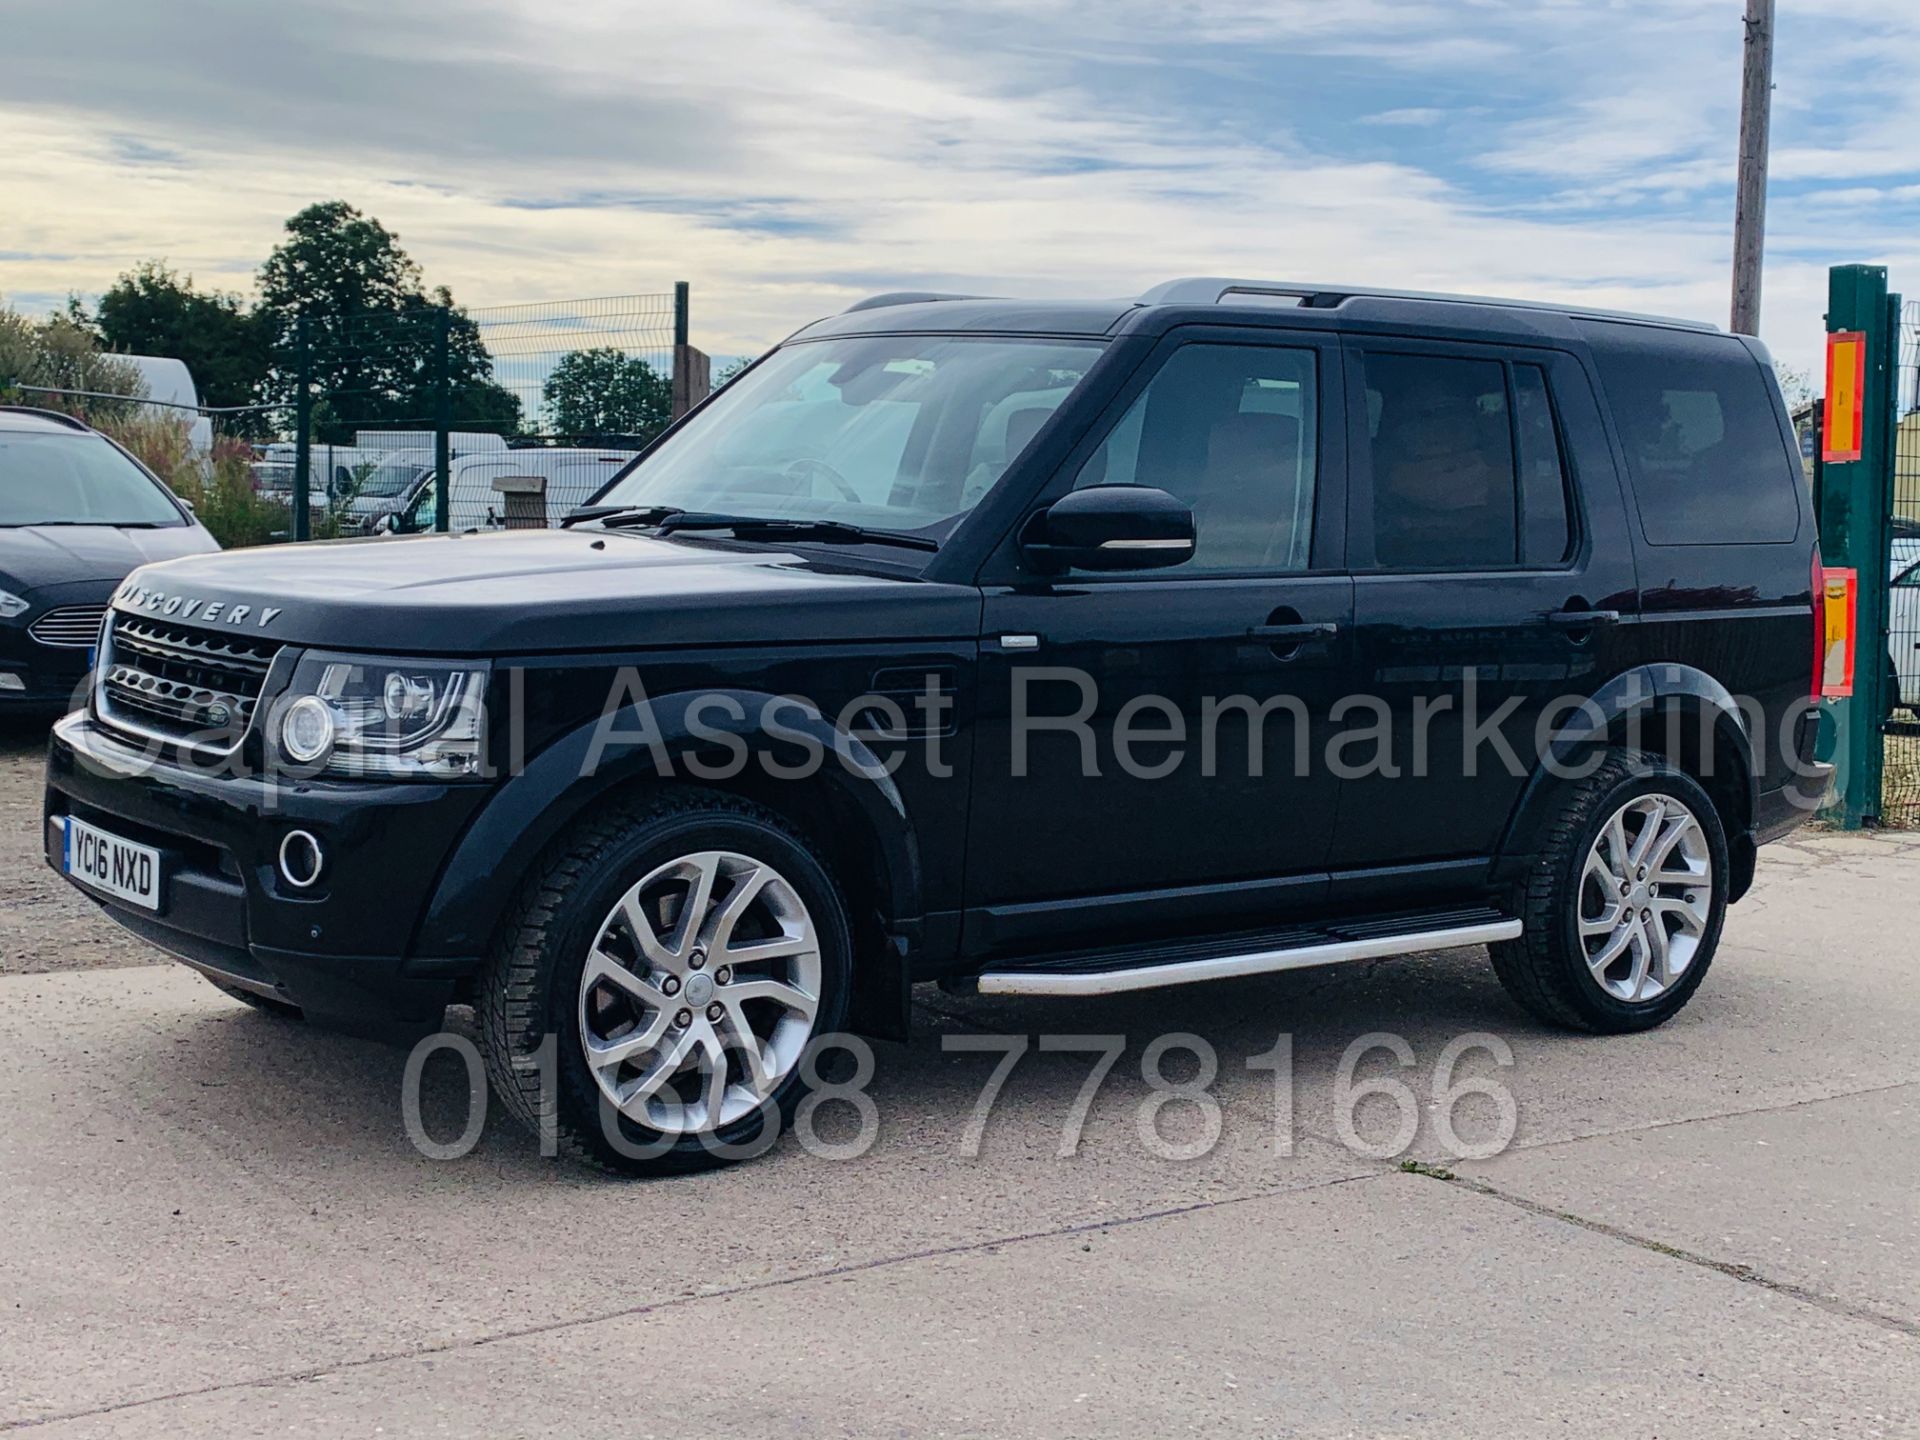 (On Sale) LAND ROVER DISCOVERY 4 *LANDMARK* 7 SEATER SUV (2016) '3.0 SDV6 - 8 SPEED AUTO' (1 OWNER) - Image 7 of 65